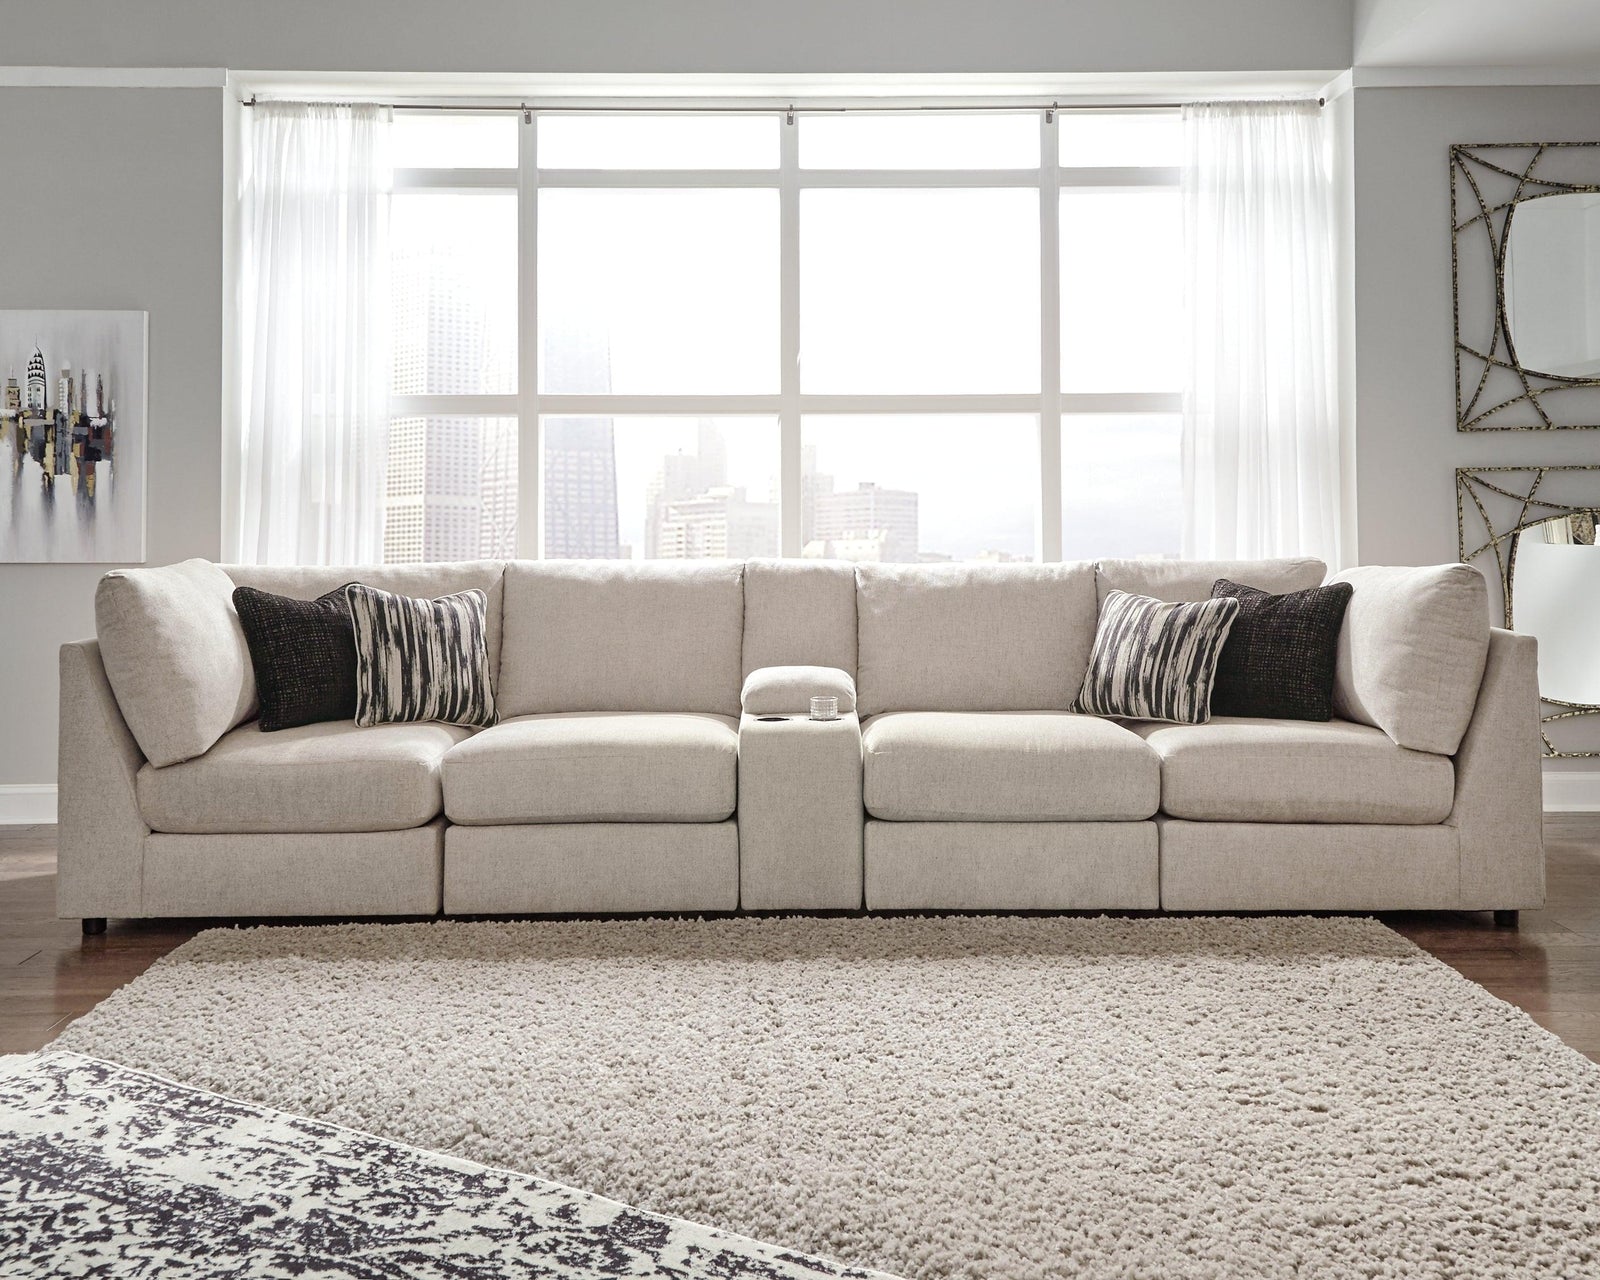 Kellway Bisque 5-Piece Sectional